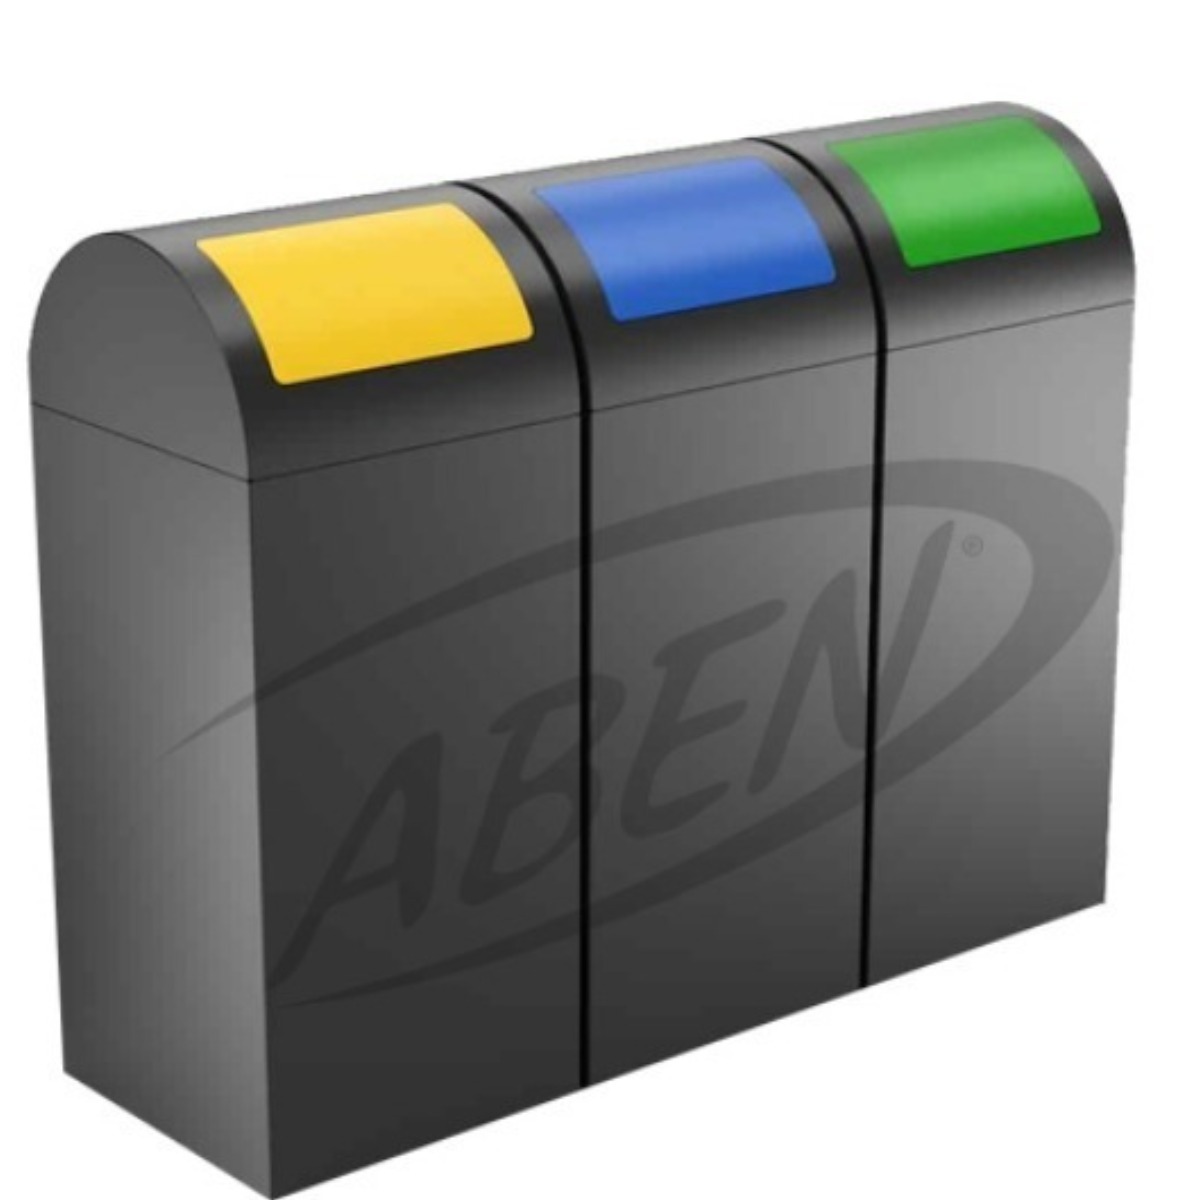 AB-762 3’Part Recycle Bin product logo